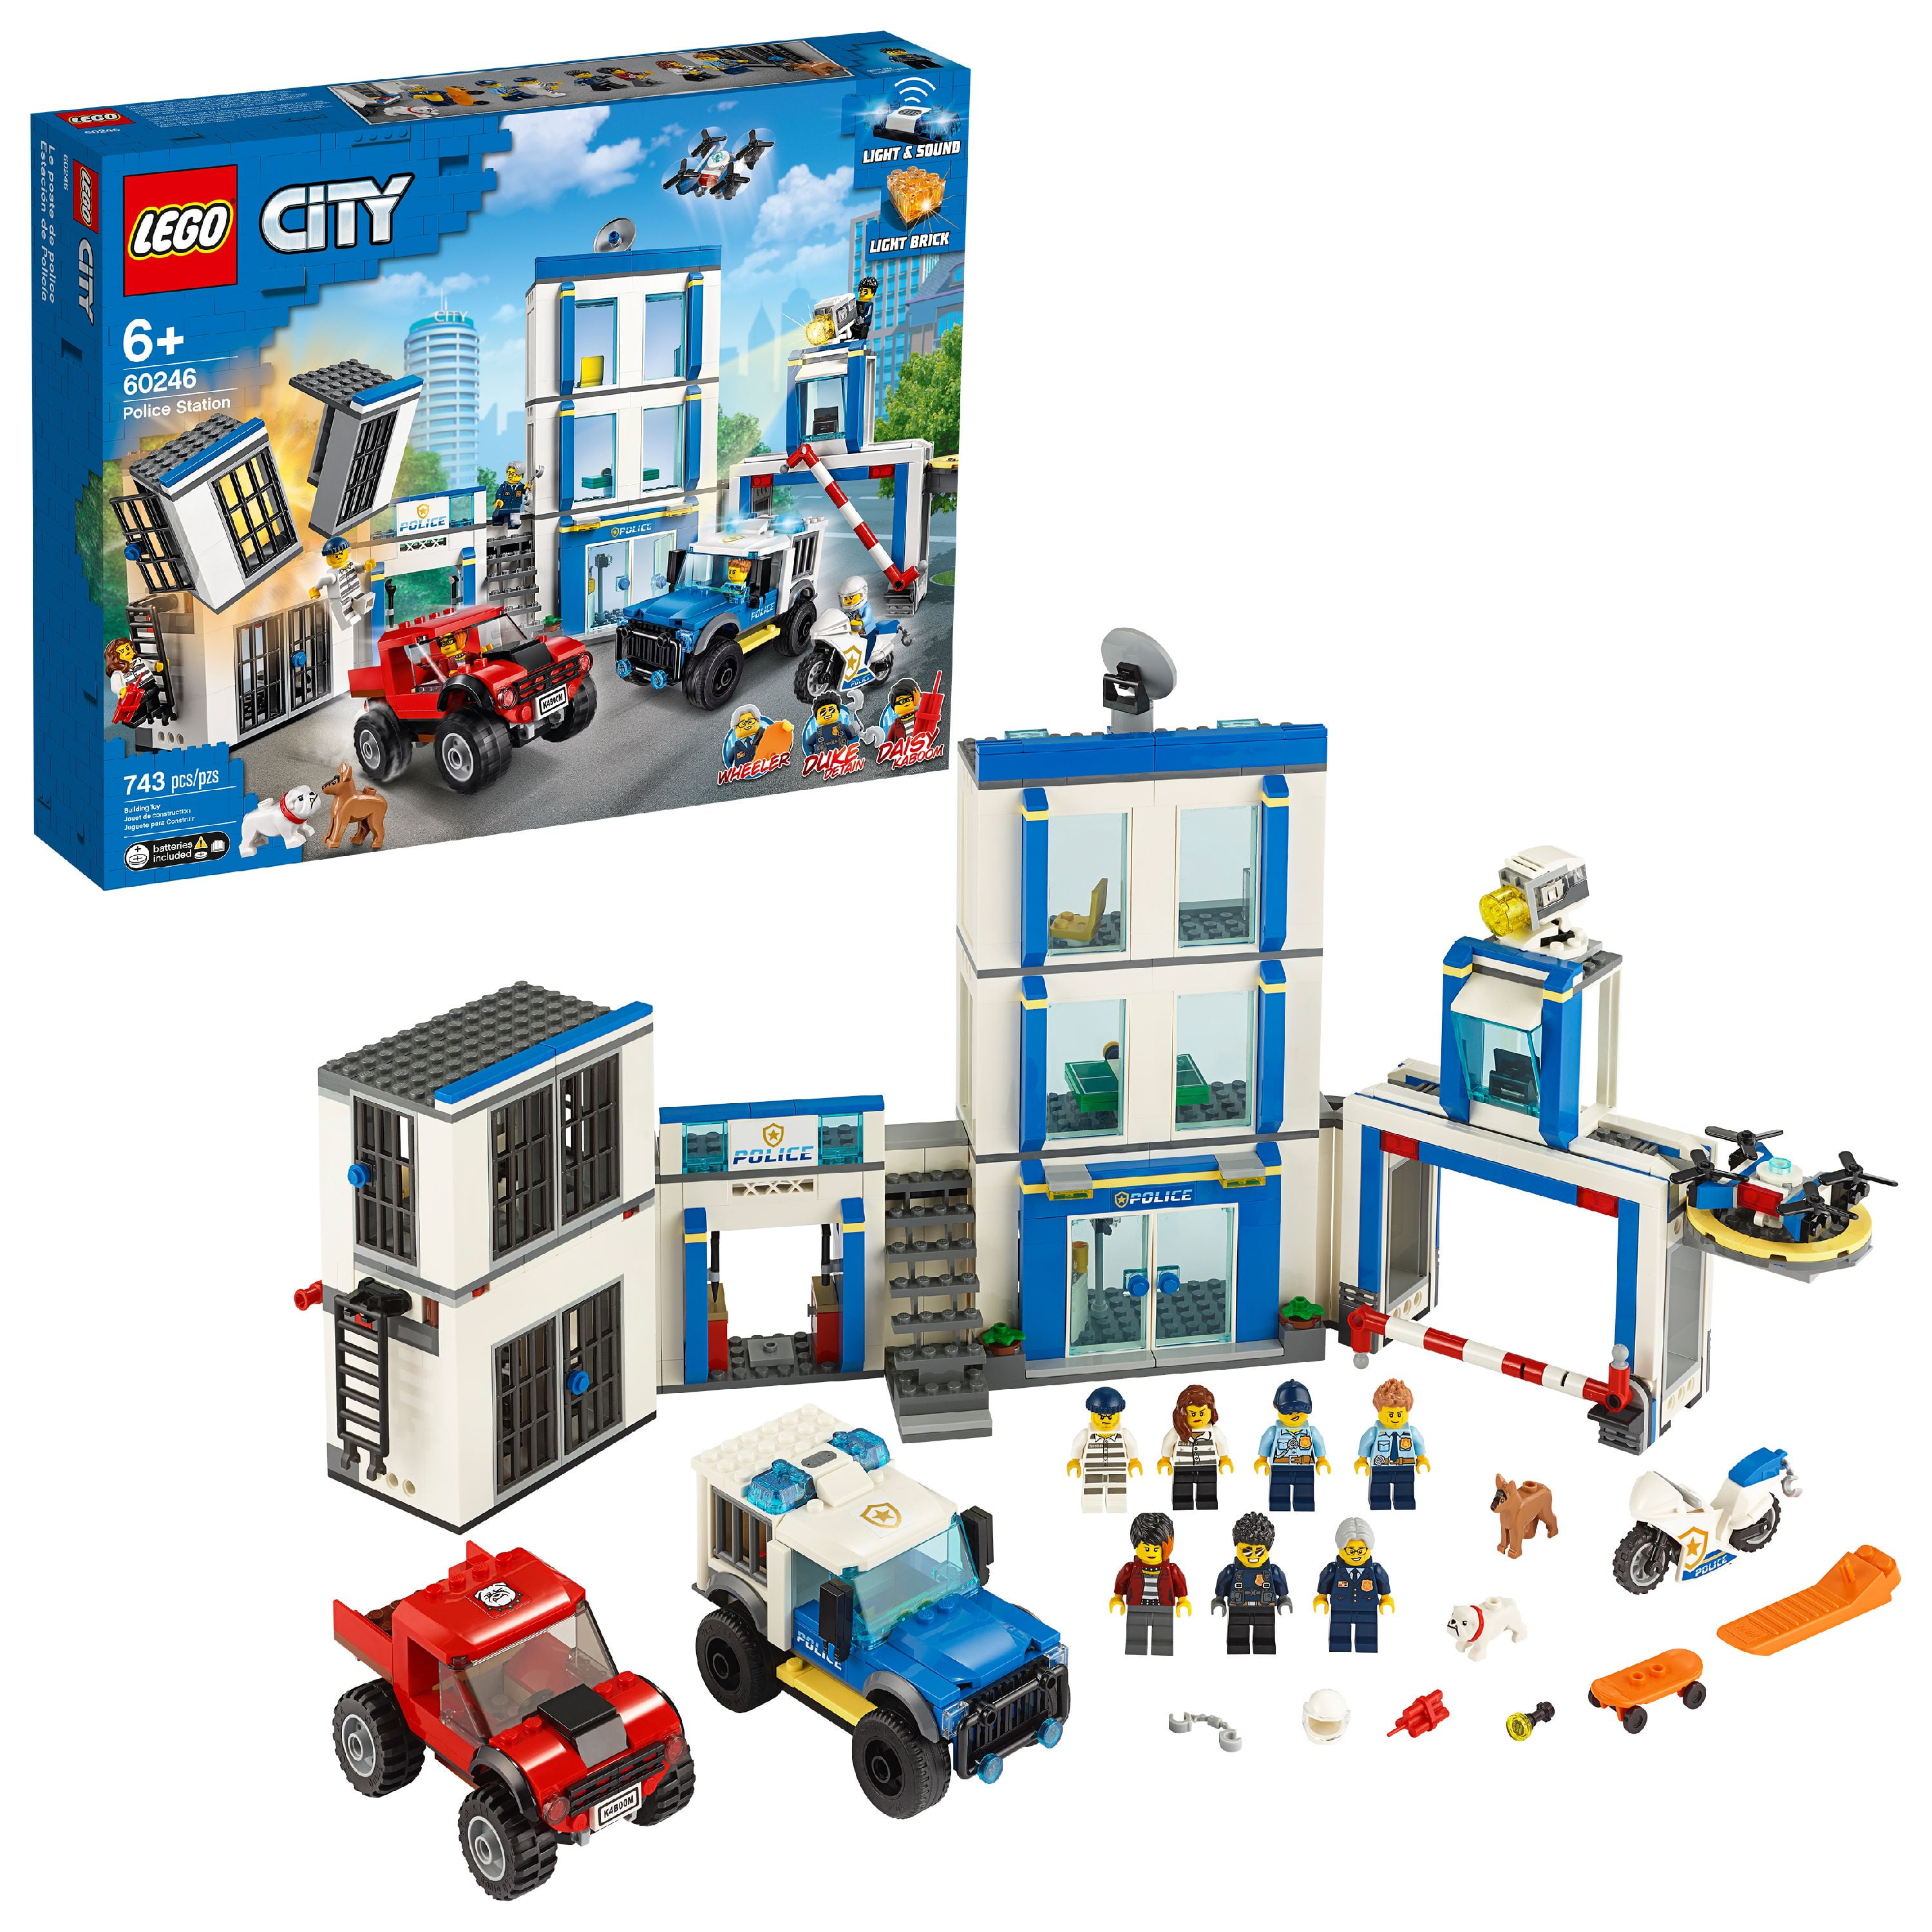 for sale online LEGO Police Water Scooter Building Kit 3231 Pieces 